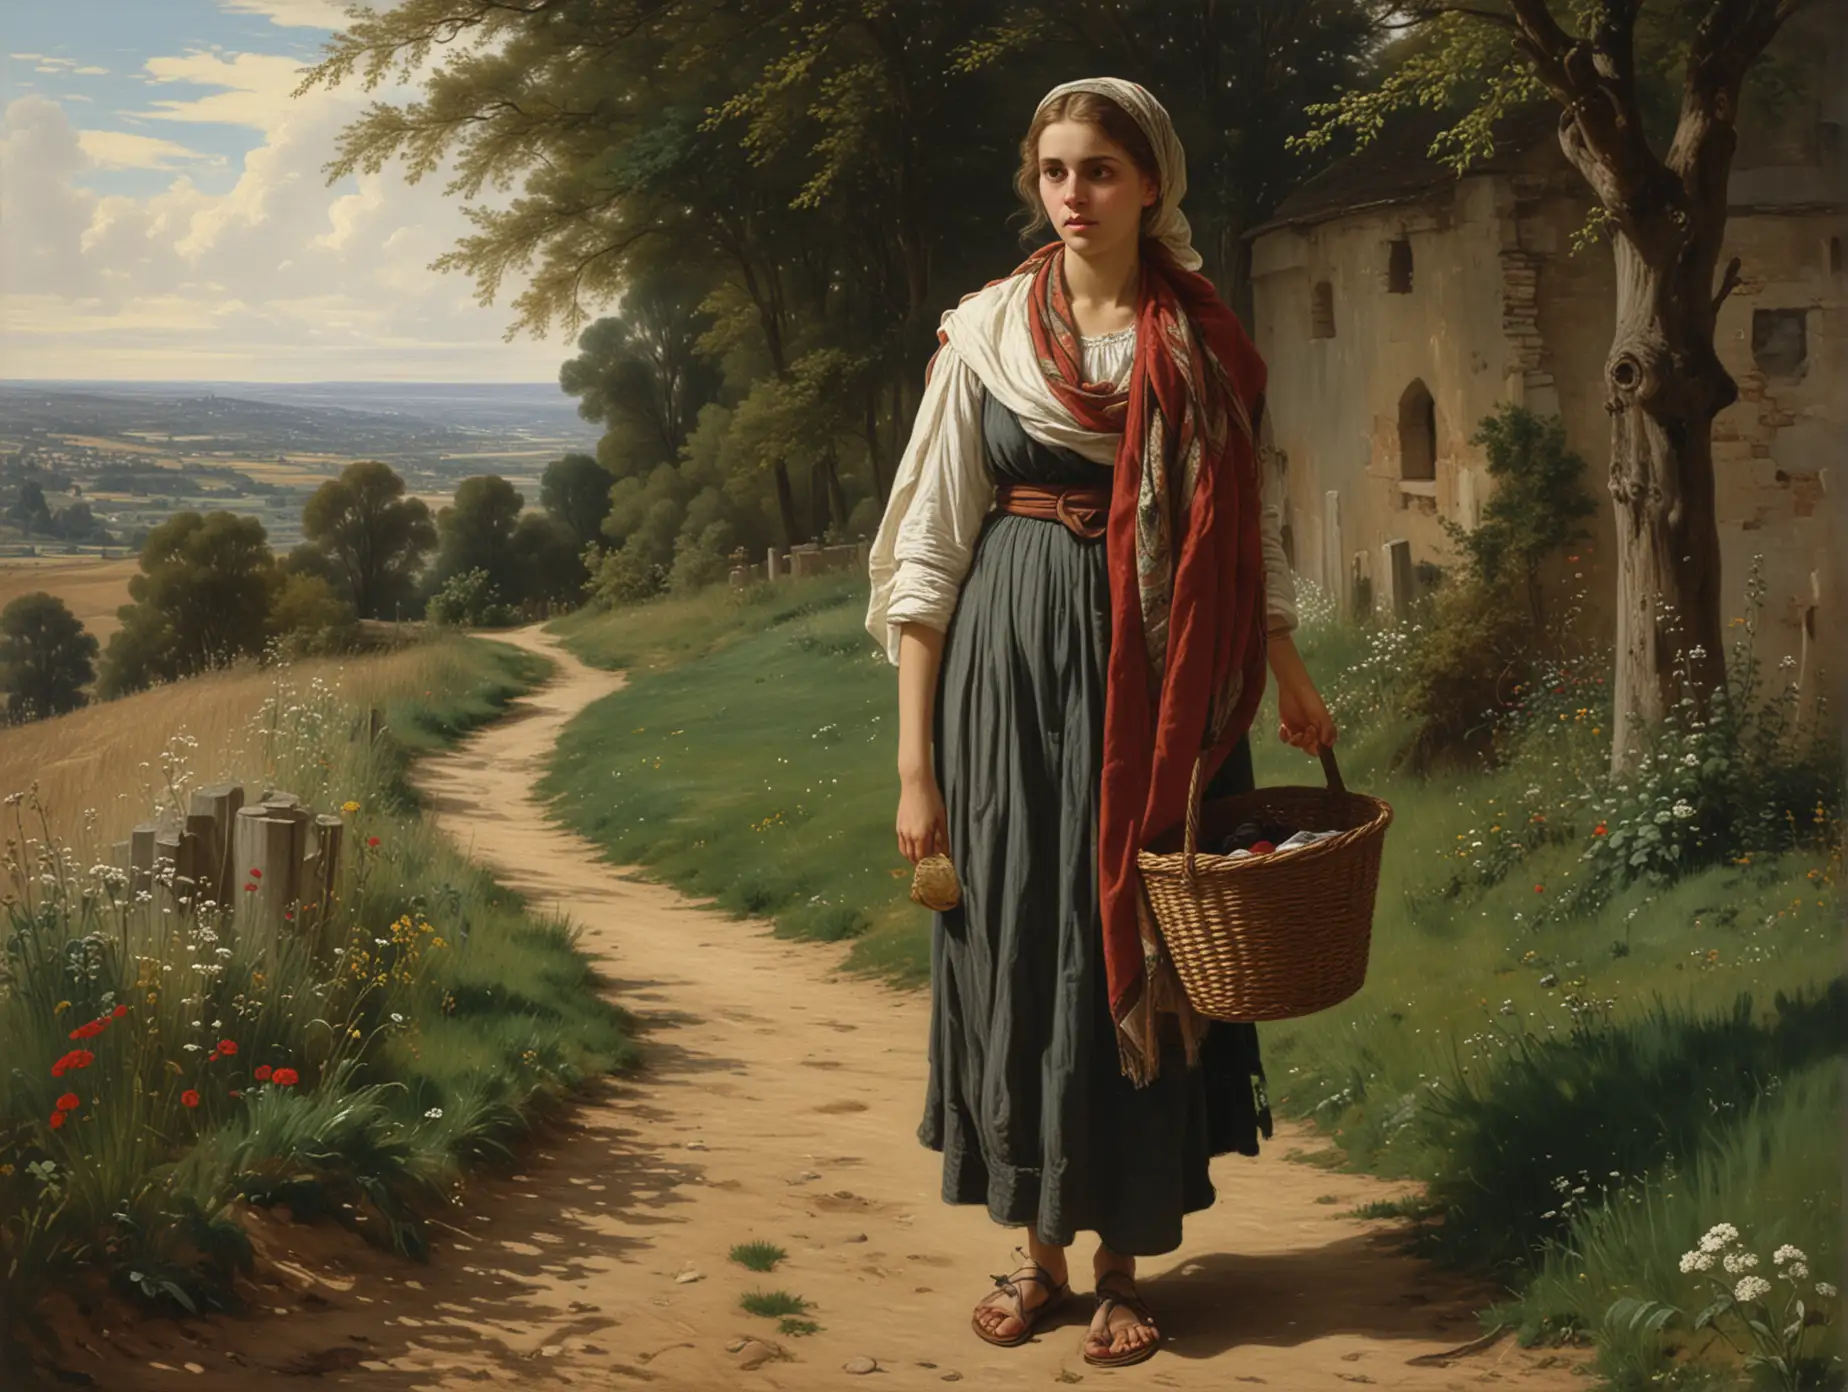 Romantic Young Girl in Open Countryside Carrying a Wicker Basket